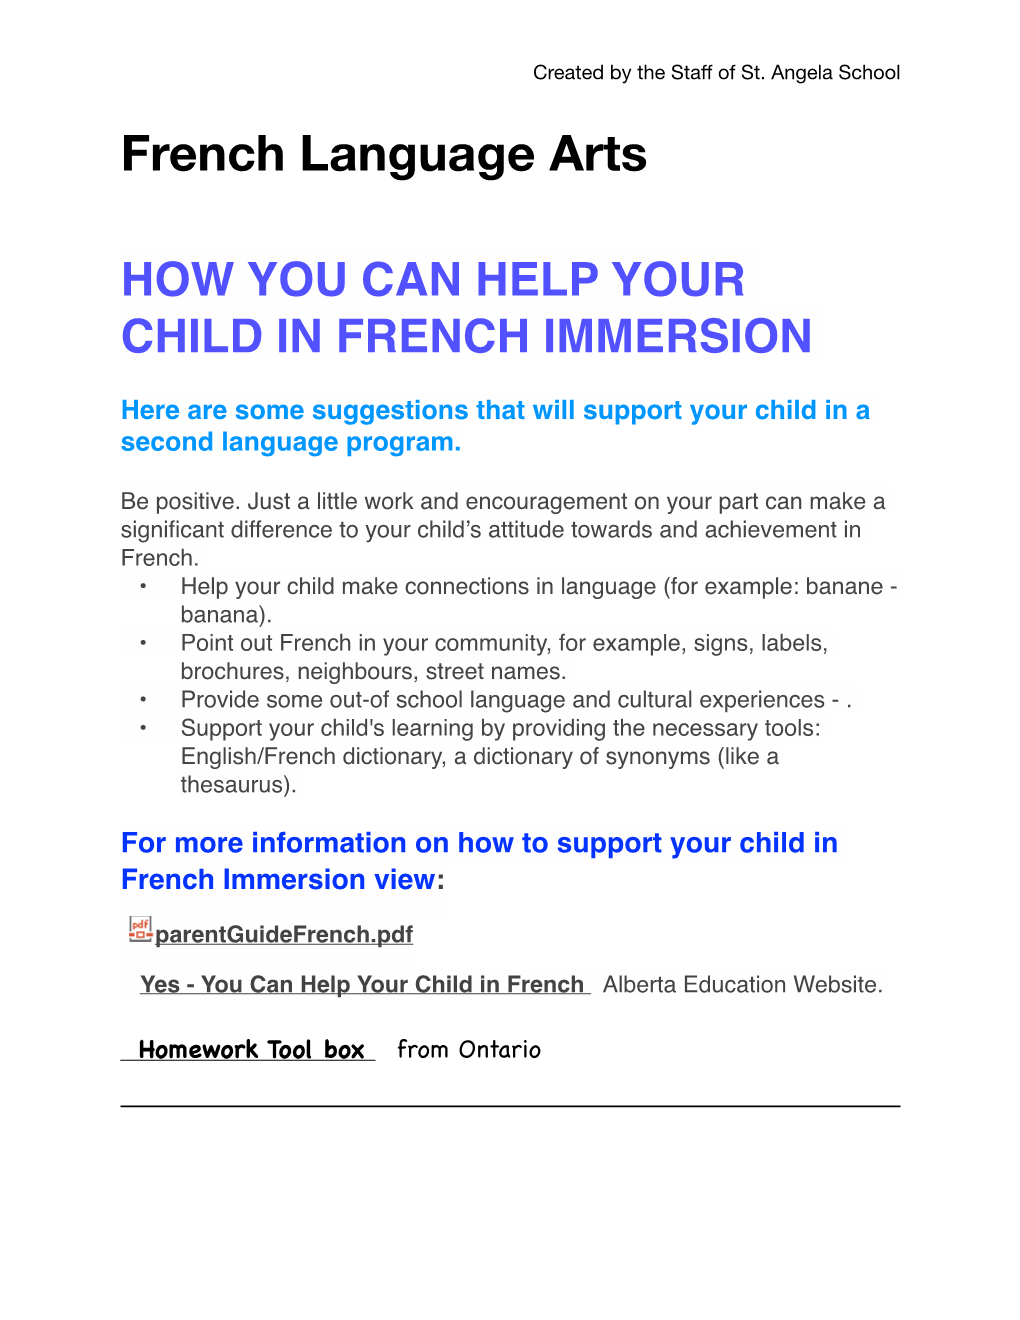 How You Can Help Your Child in French Immersion